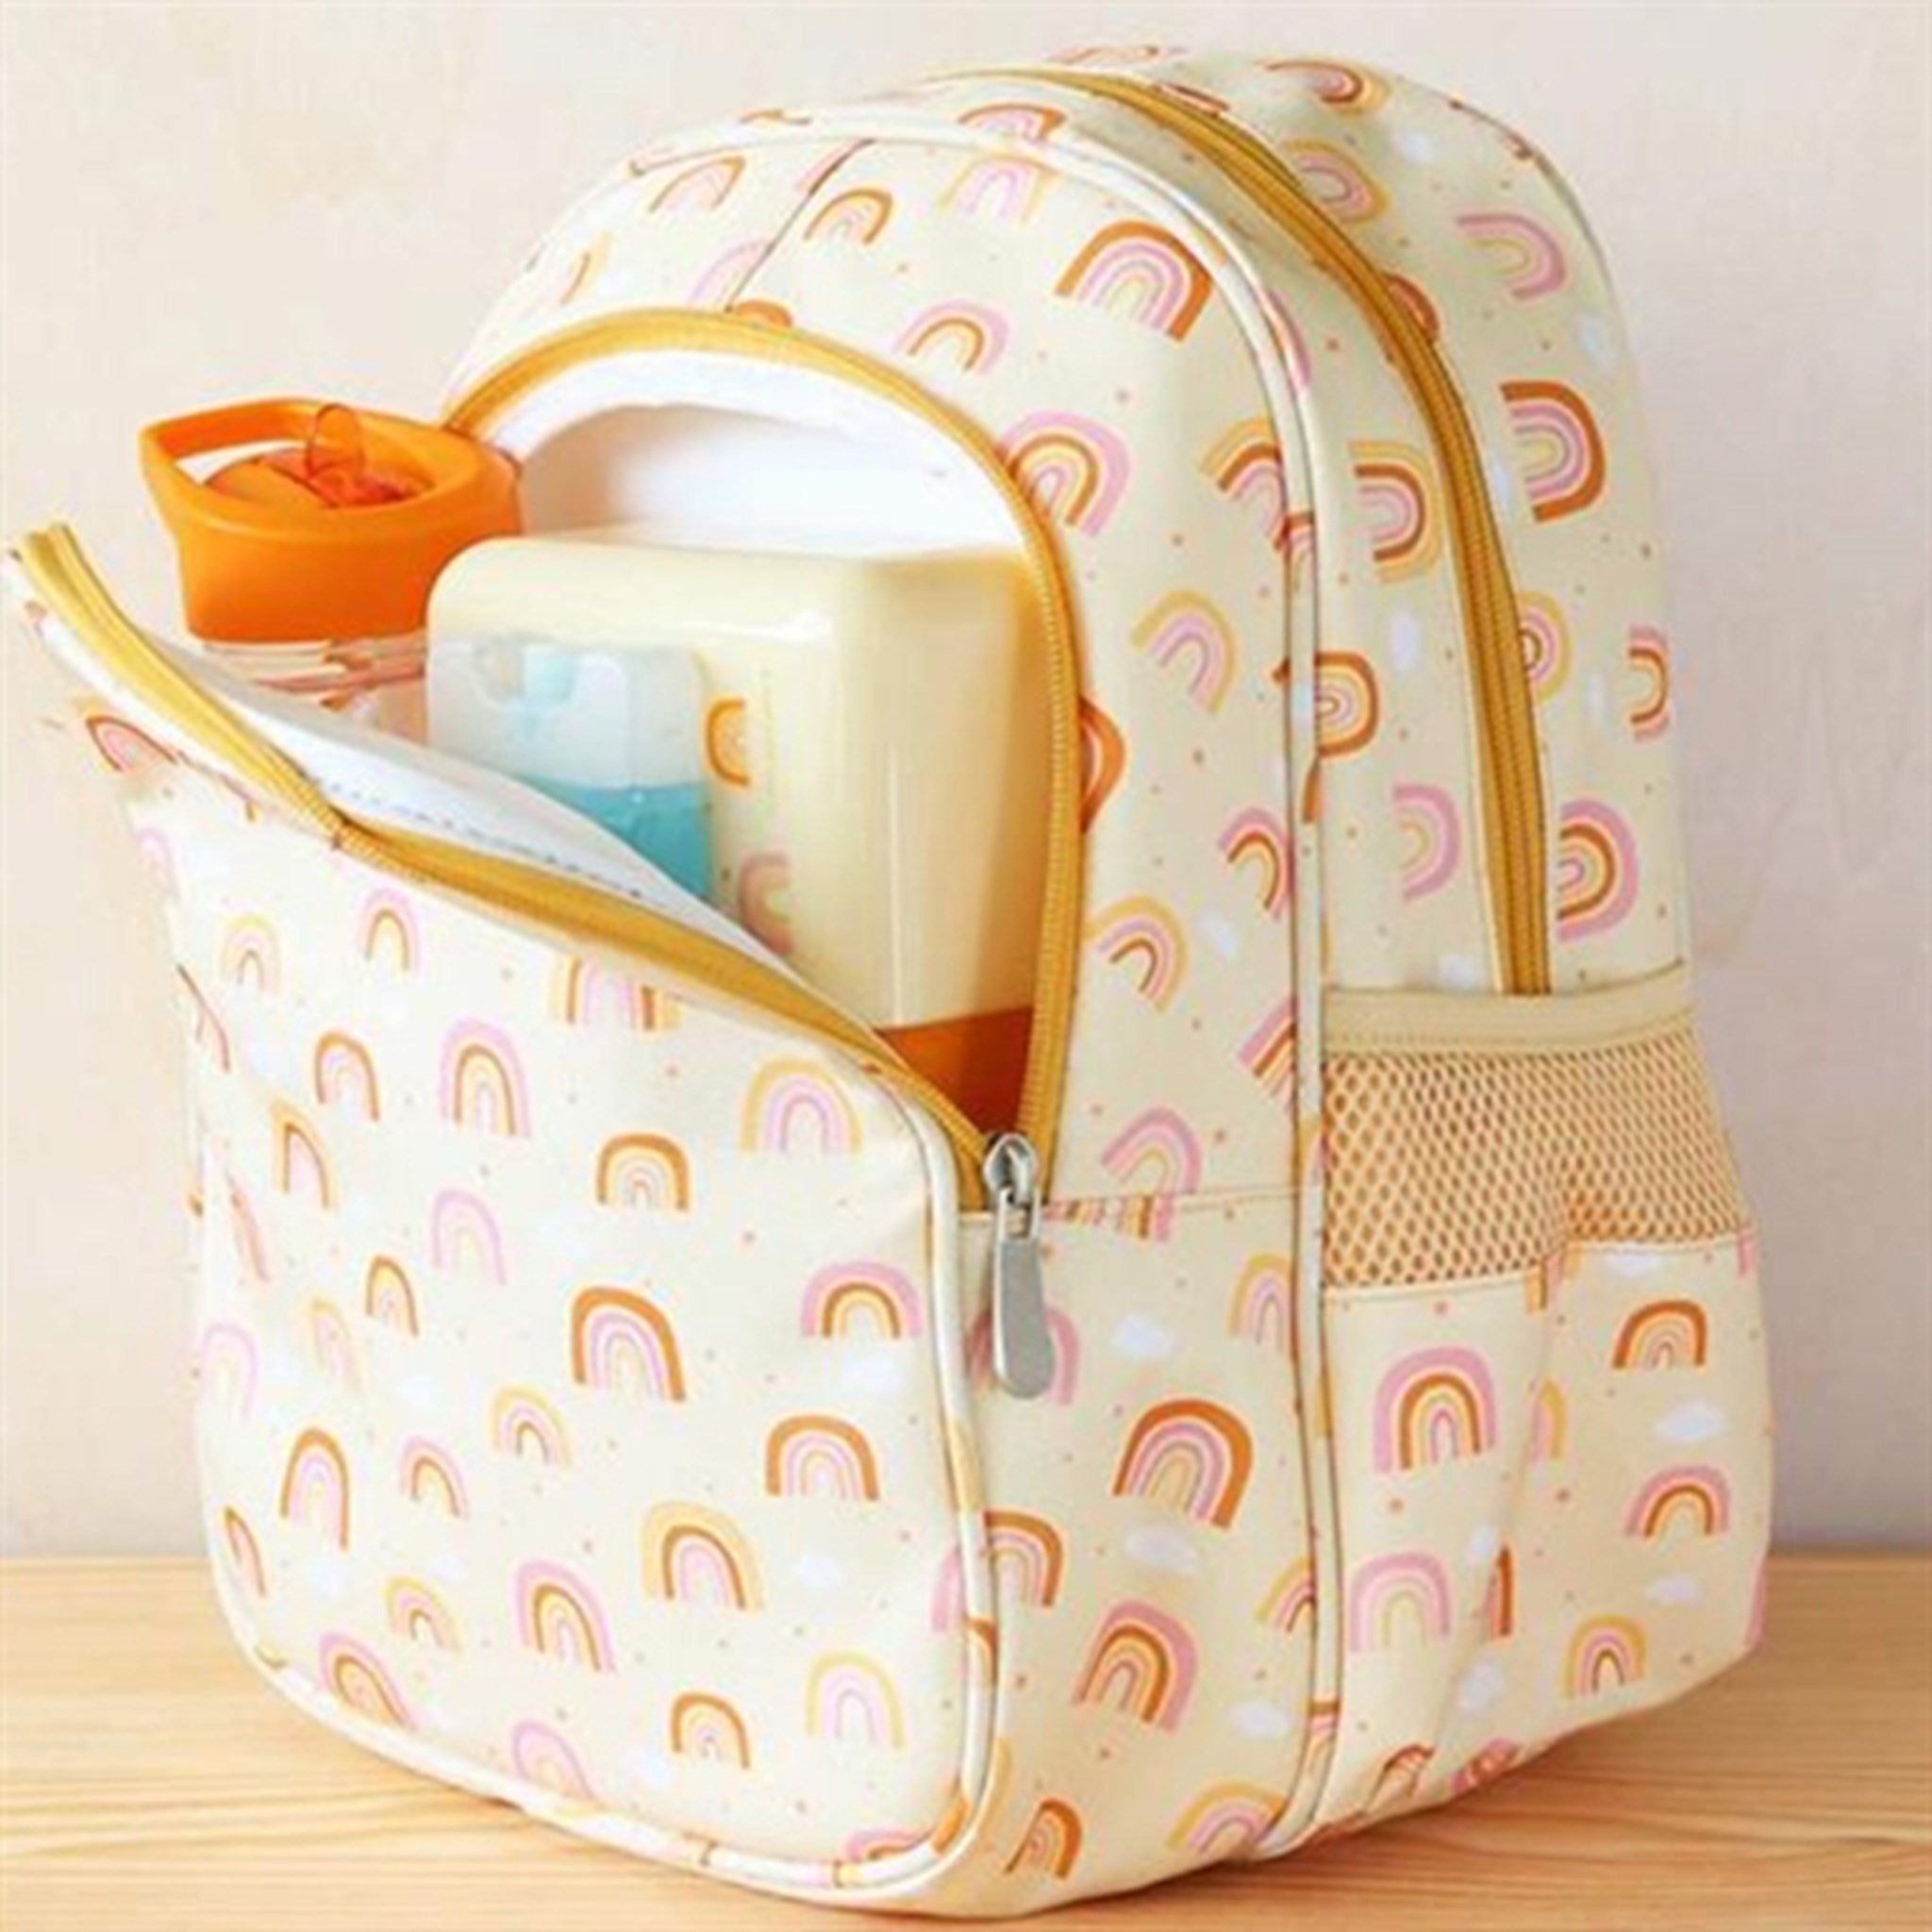 A Little Lovely Company Backpack Rainbows 3